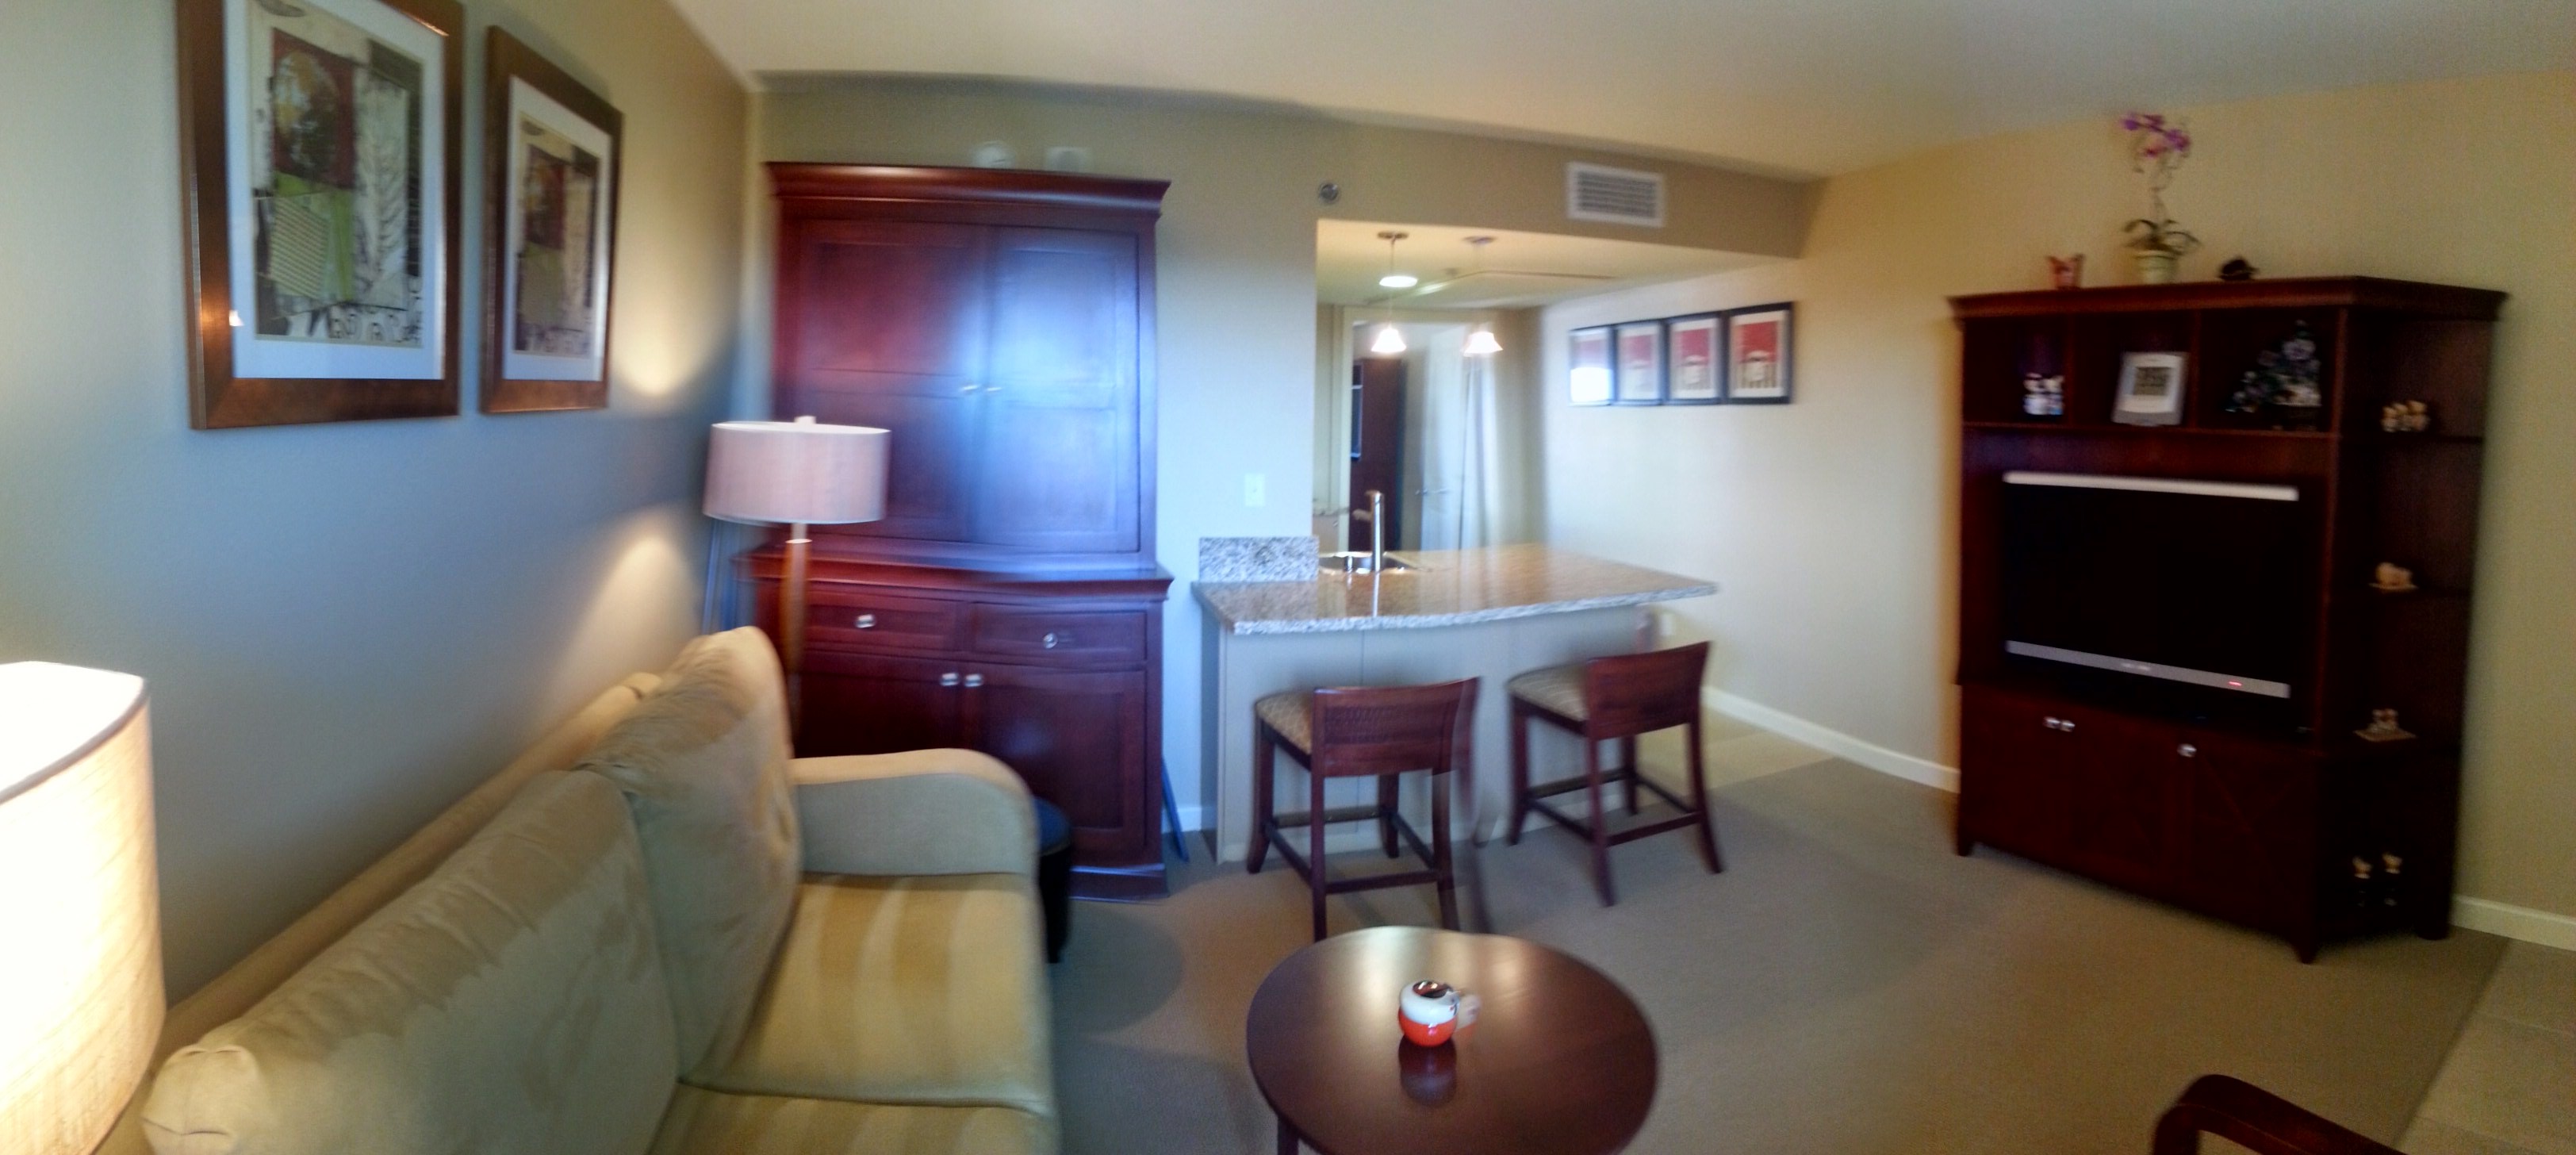 801 National City Blvd Unit 510, National City, Ca - 1 bedroom Condo for sale